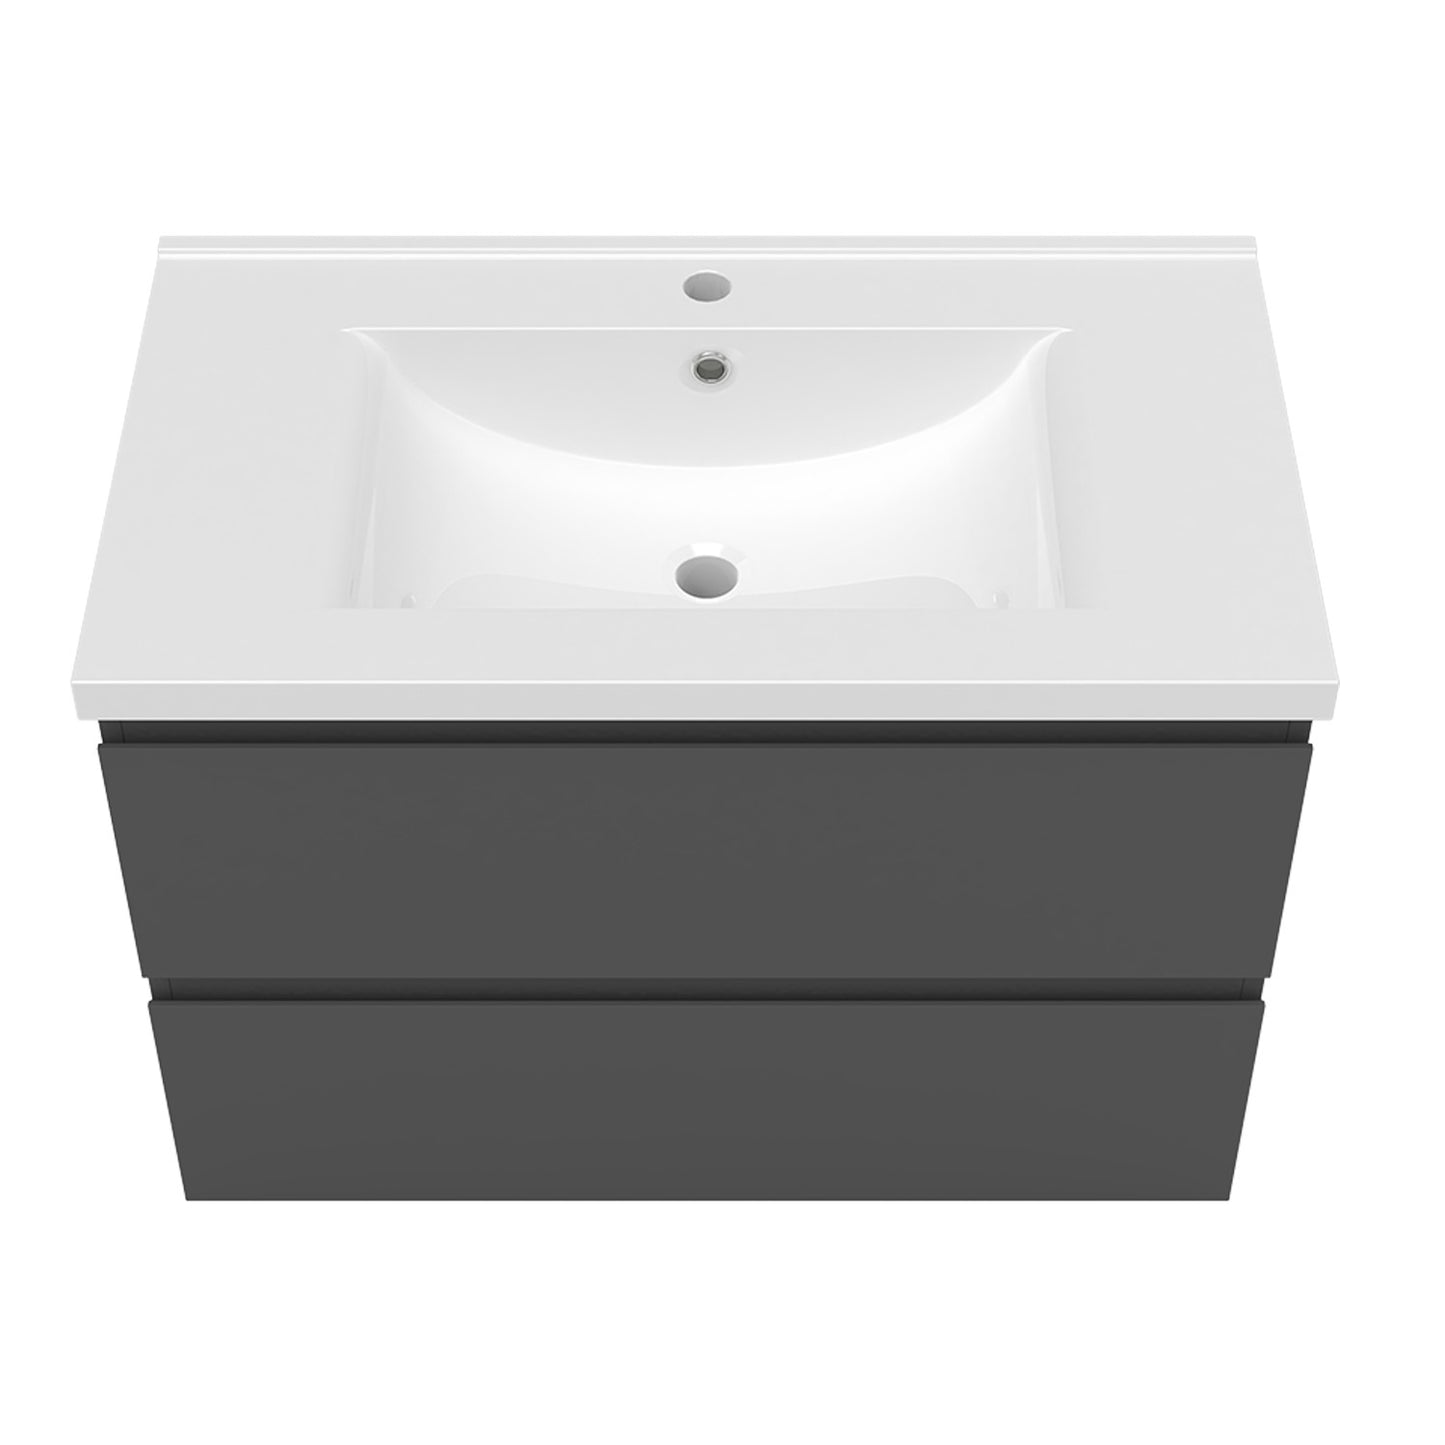 800mm Wide Wall Mounted Vanity Units and Sink 2 Drawers - Matt Grey